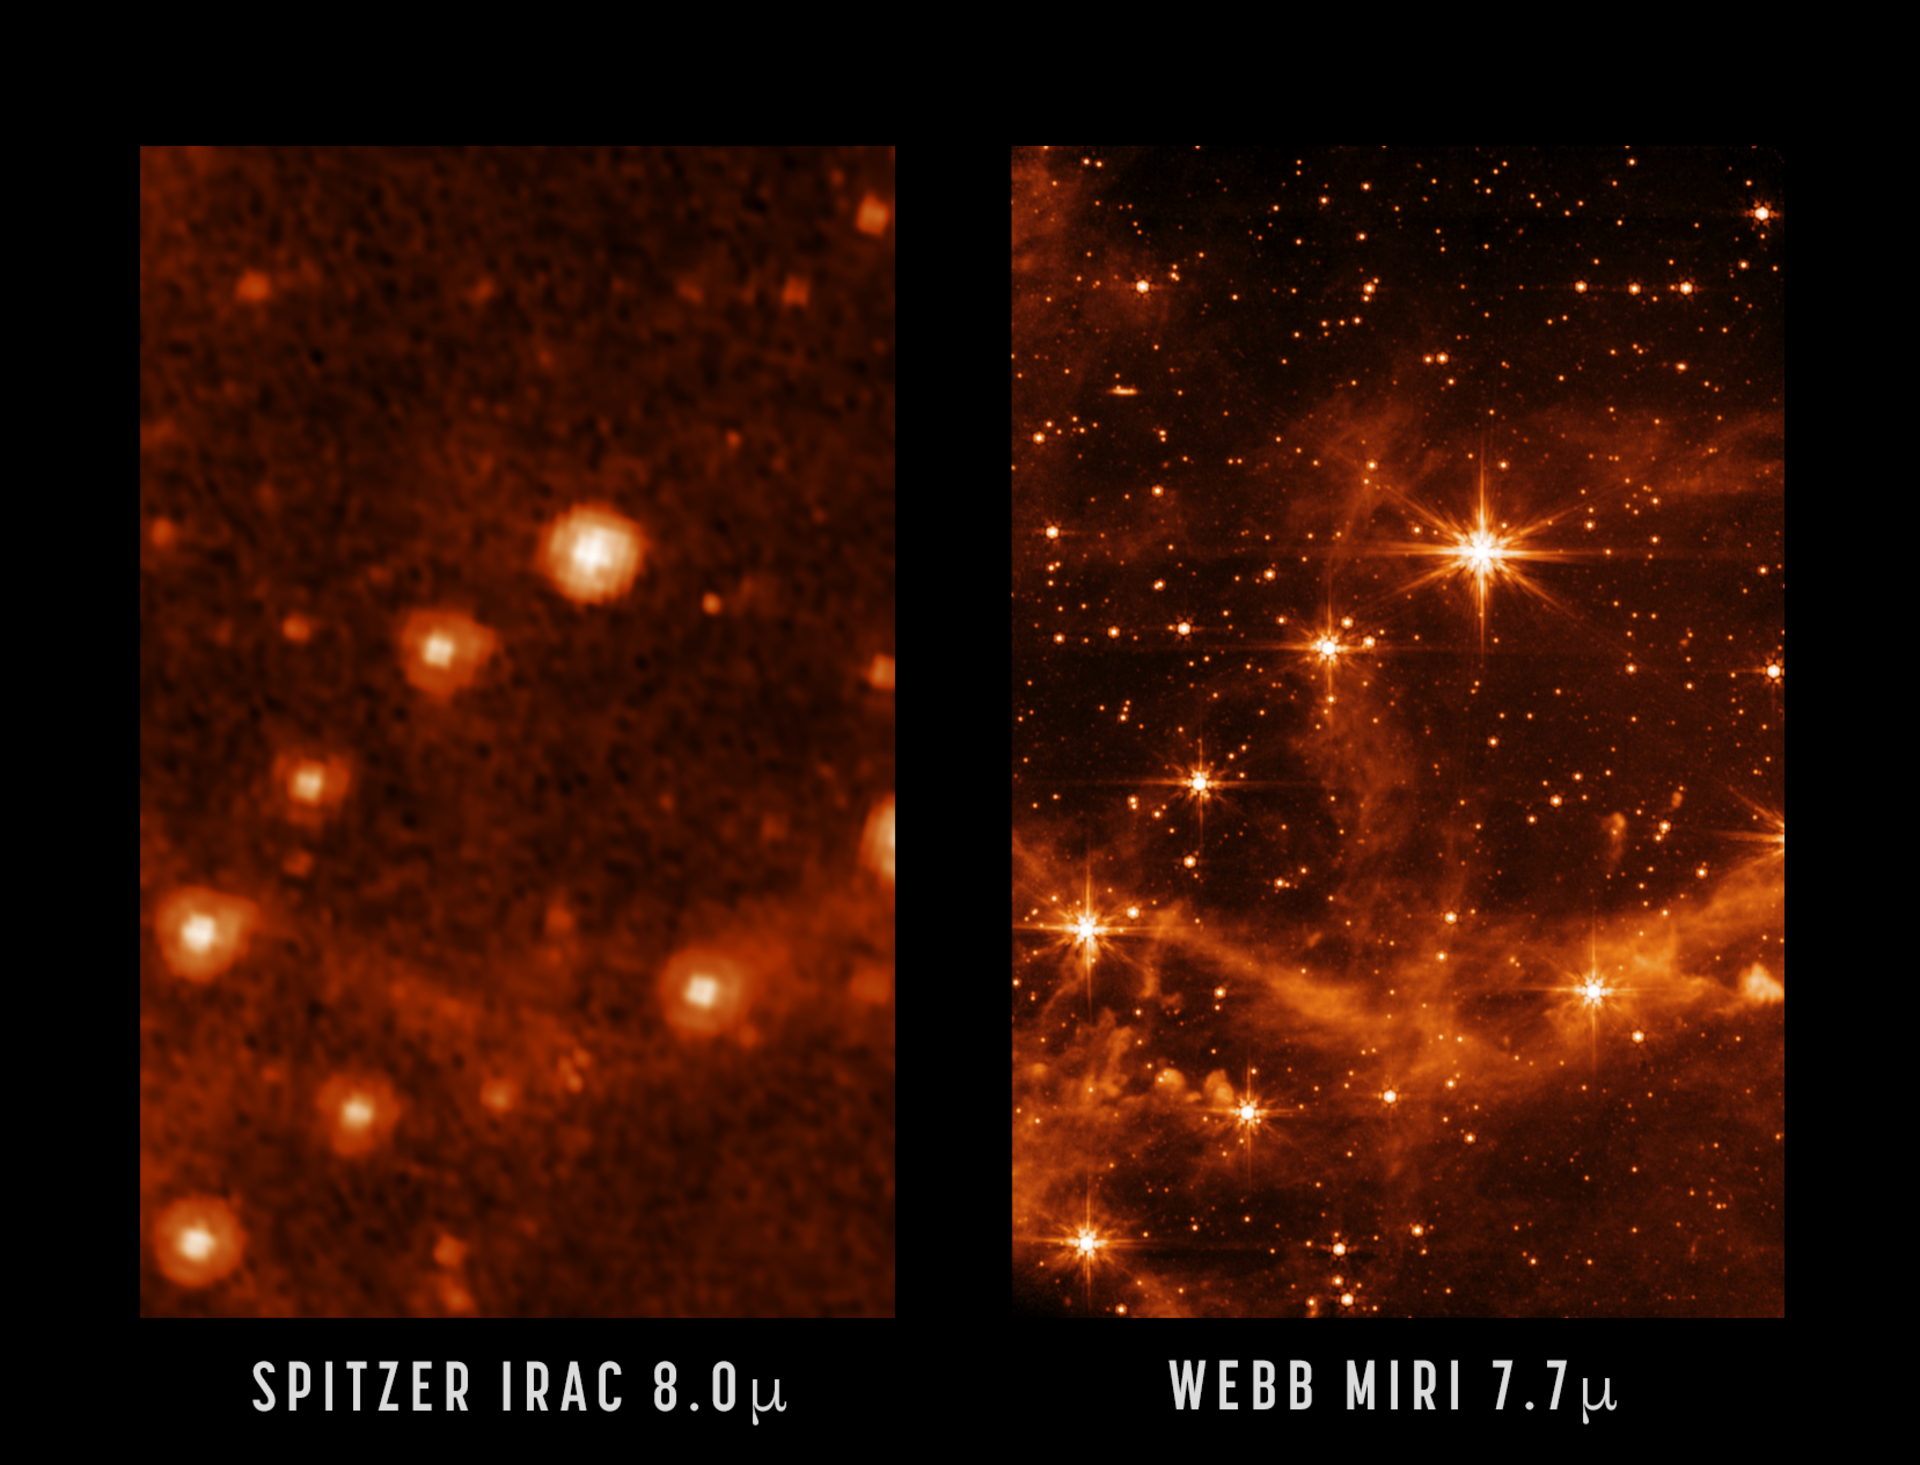 Pictures of the same area Webb Space Telescope with Spitzer Space Telescope